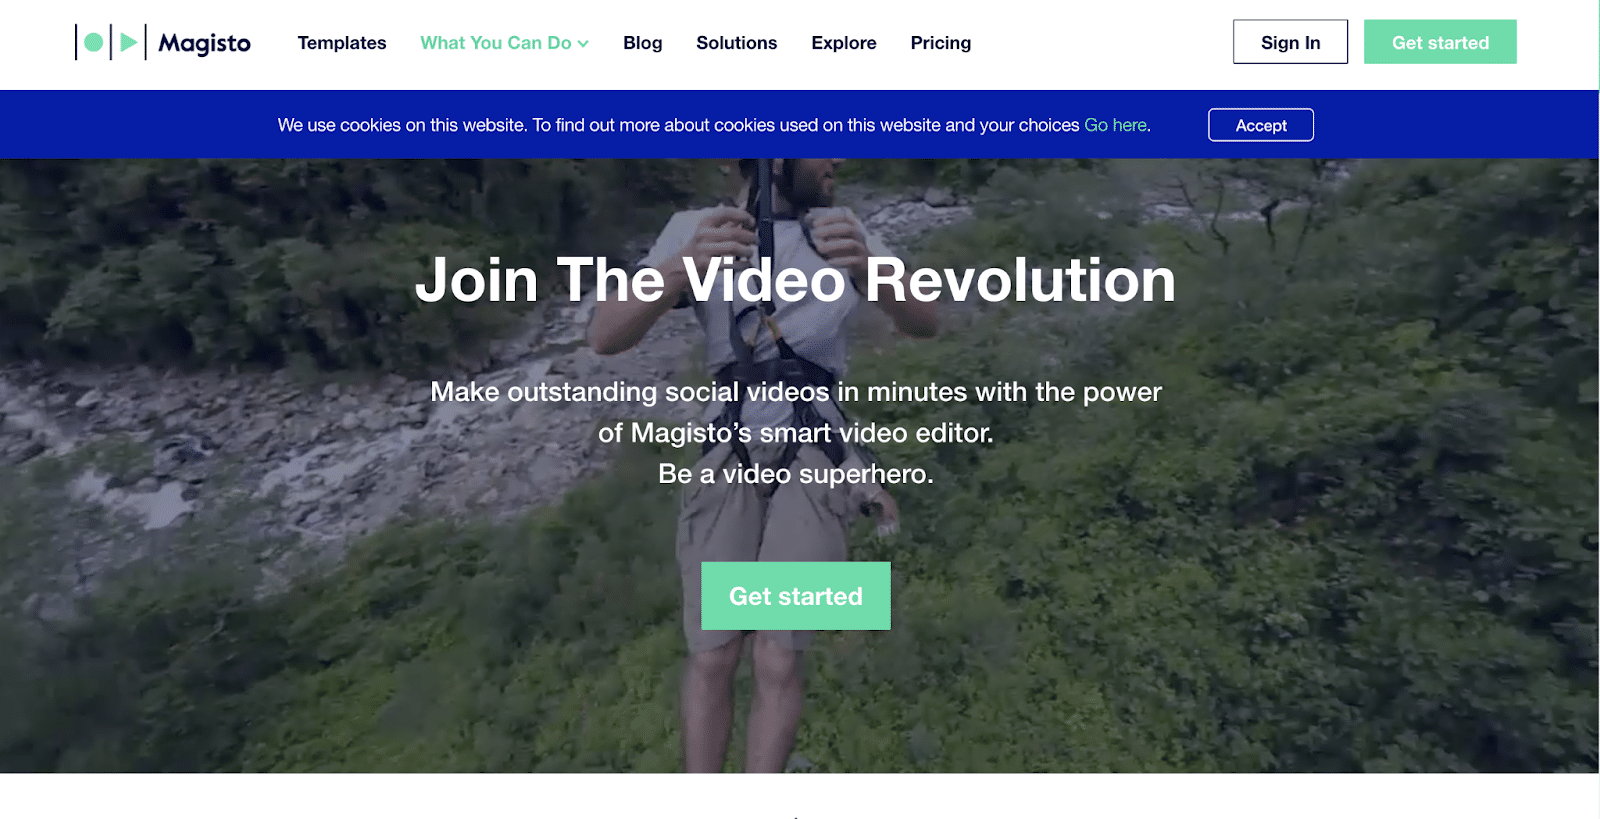 Magisto is an easy-to-use online video editor that deploys AI to make quick videos.